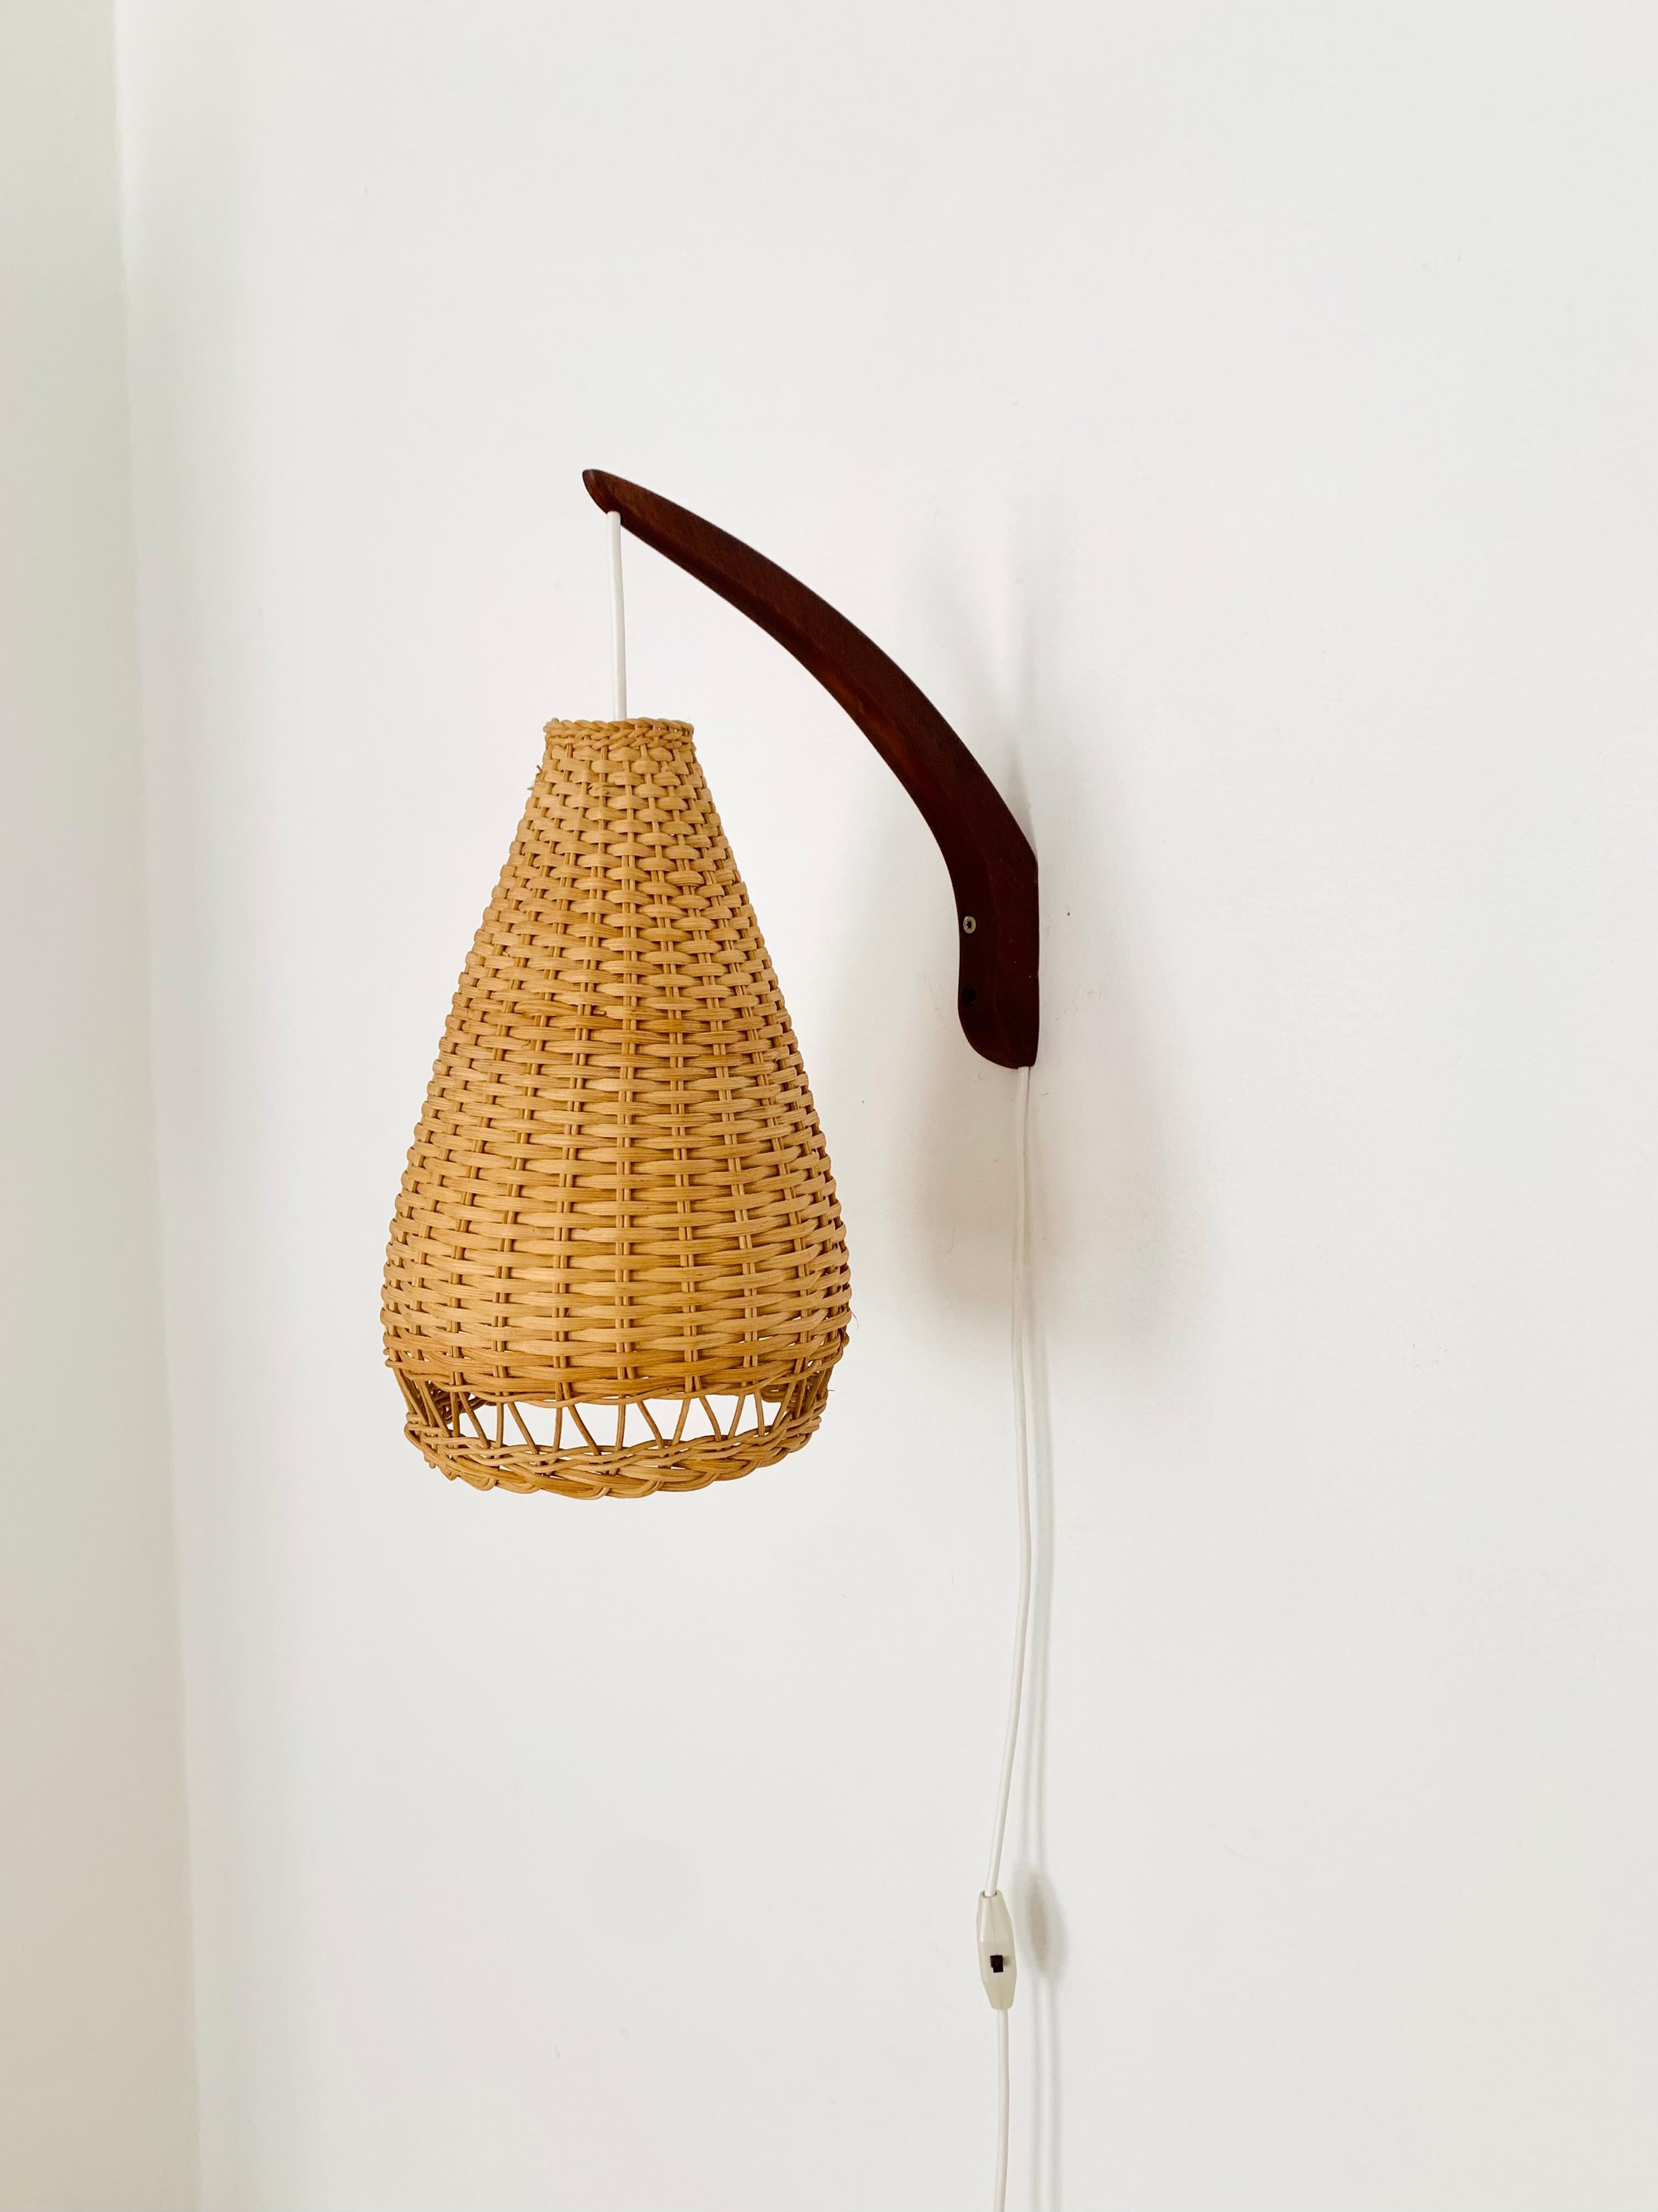 Wonderful Danish teak wall lamp from the 1960s.
Great and unusual design with a fantastically elegant appearance.
The rattan lampshade creates a very cozy atmosphere and a spectacular play of light.

Condition:

Very good vintage condition with